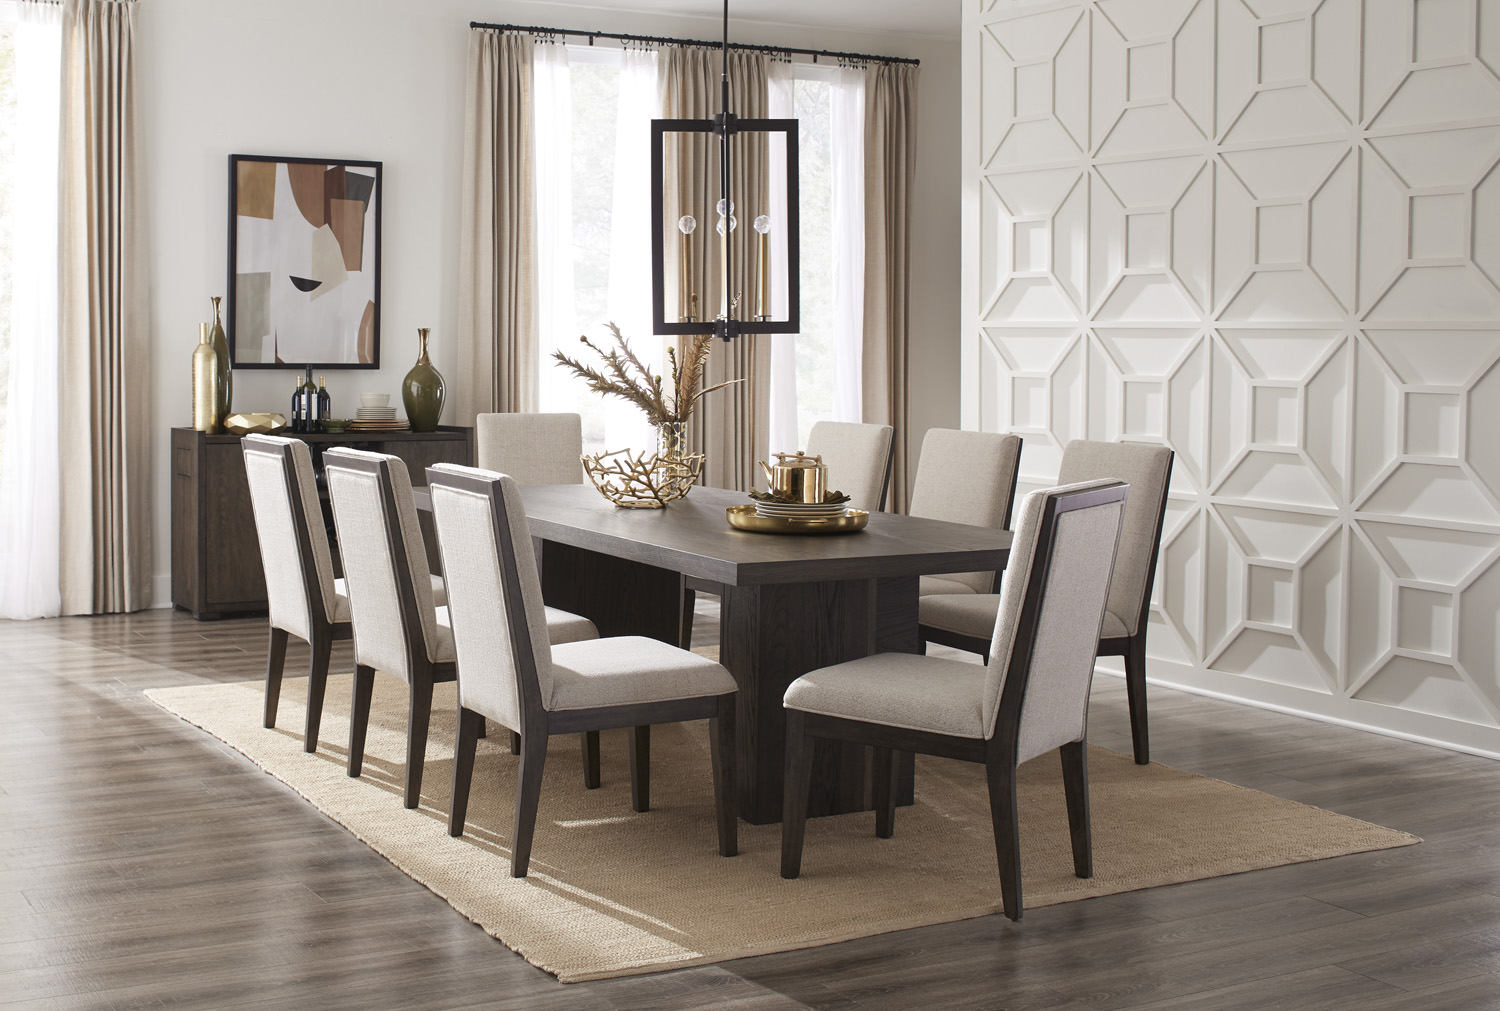 Aspenhome Beckett Dining Table Chairs